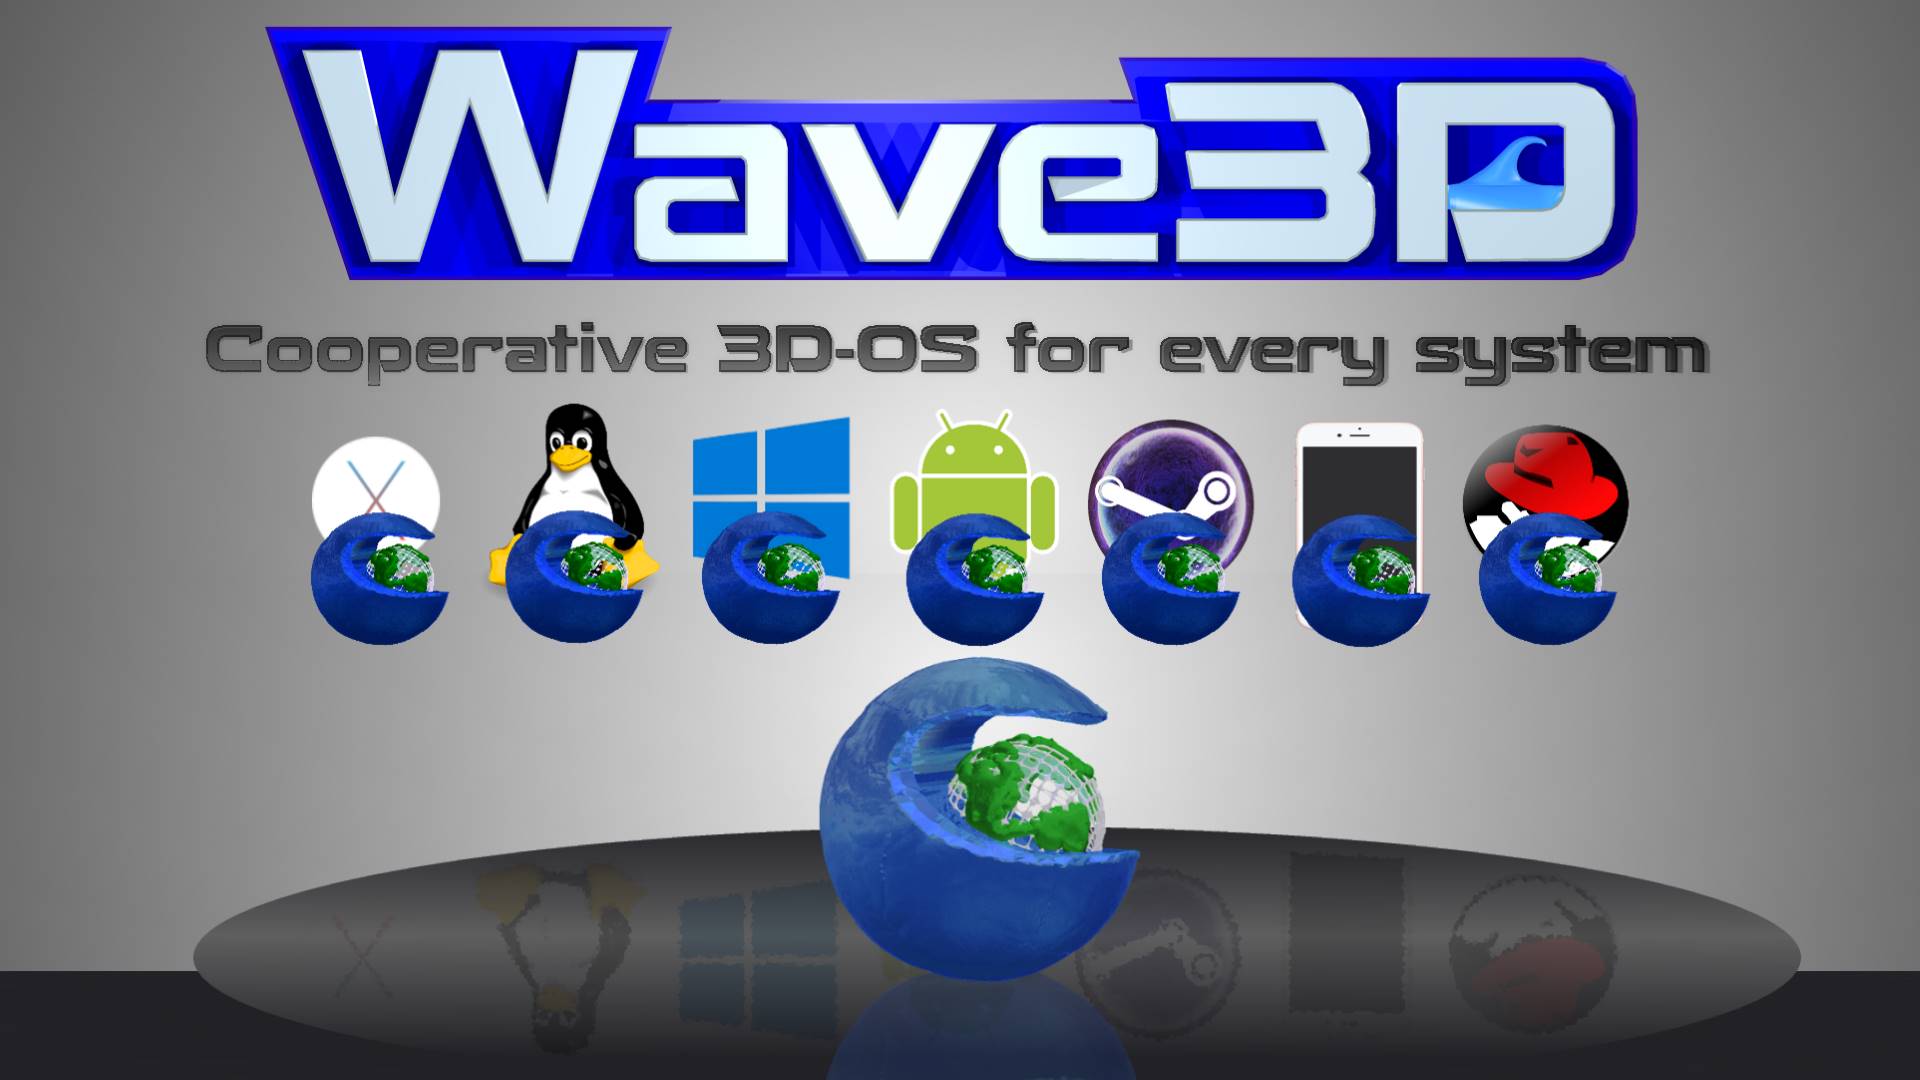 Wave3D is a Cooperative 3D-OS for every systen, max, linux, windows, android, steam, IOS, redhat